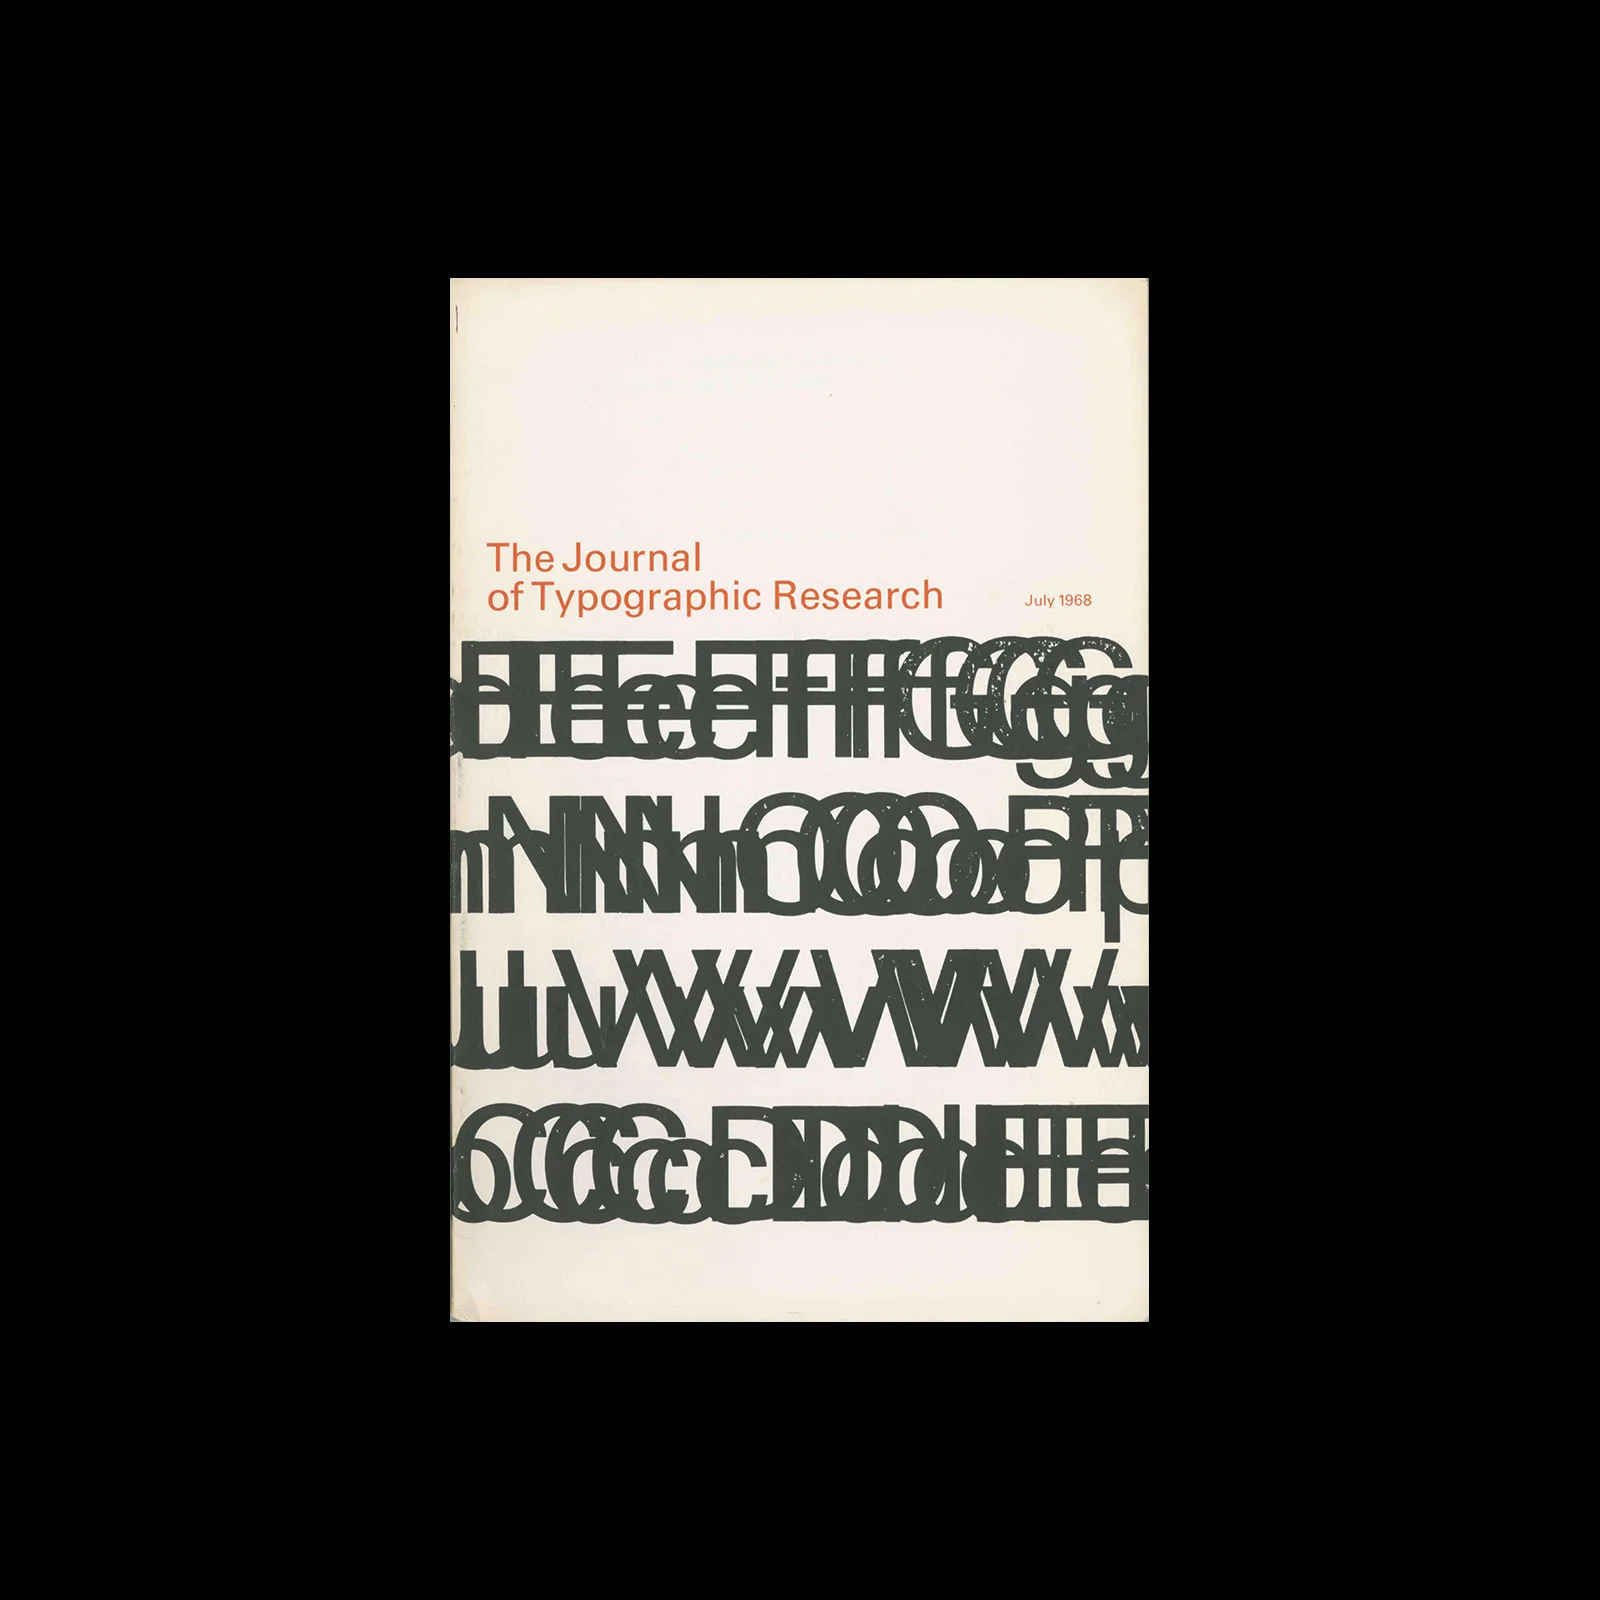 Visible Language (The Journal of Typographic Research, Vol 02, 03, July 1968